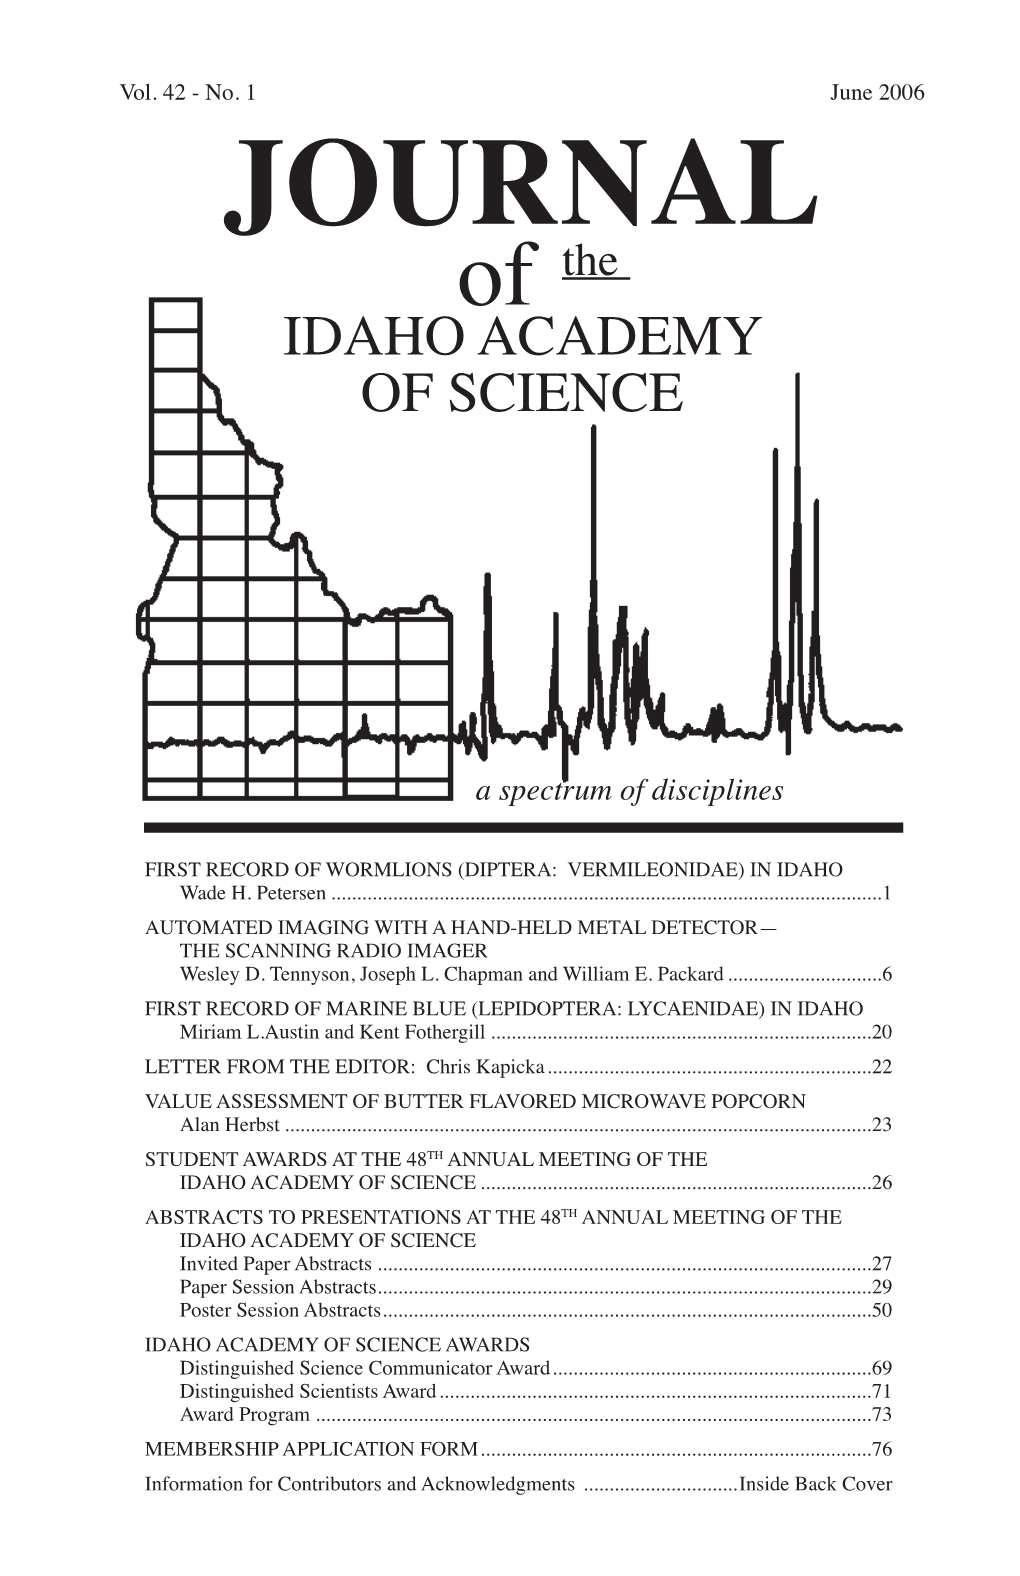 JOURNAL of the IDAHO ACADEMY of SCIENCE